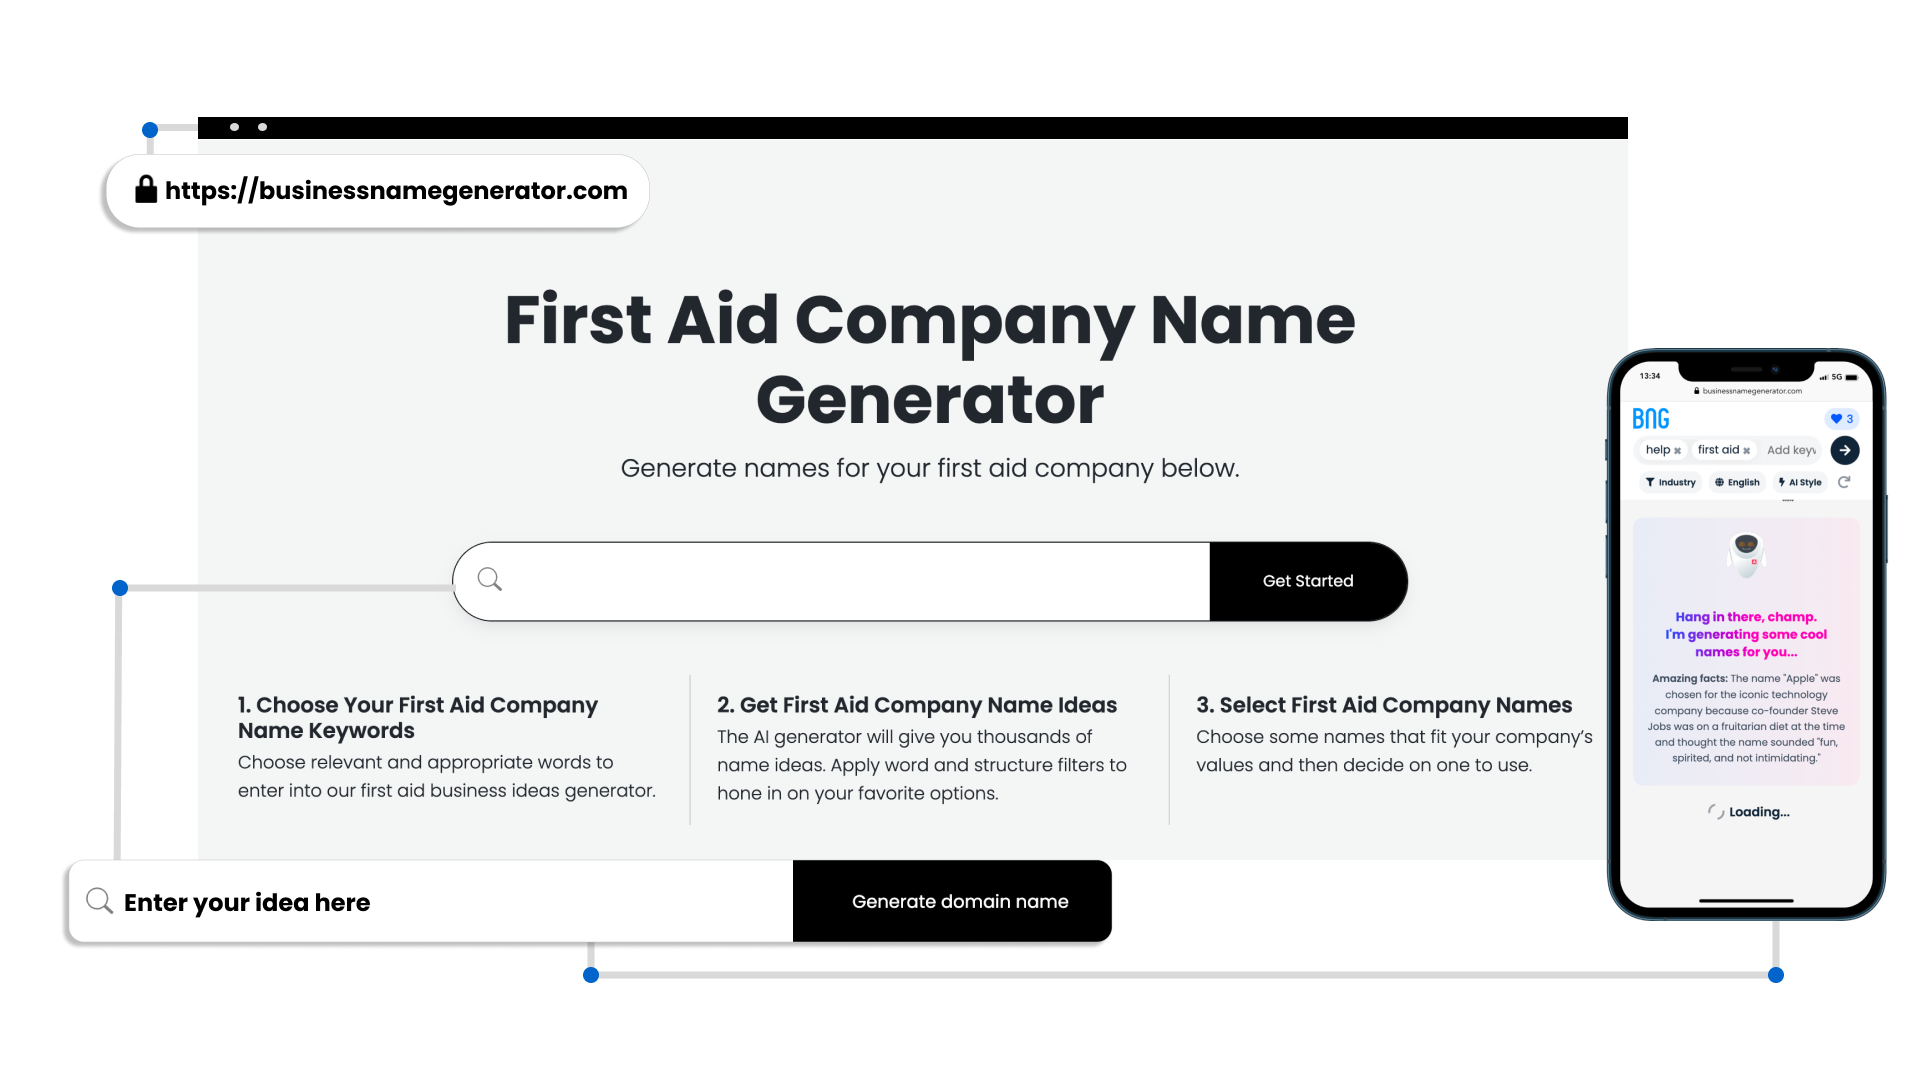 Screenshot - Benefits of our First Aid Company Name Generator